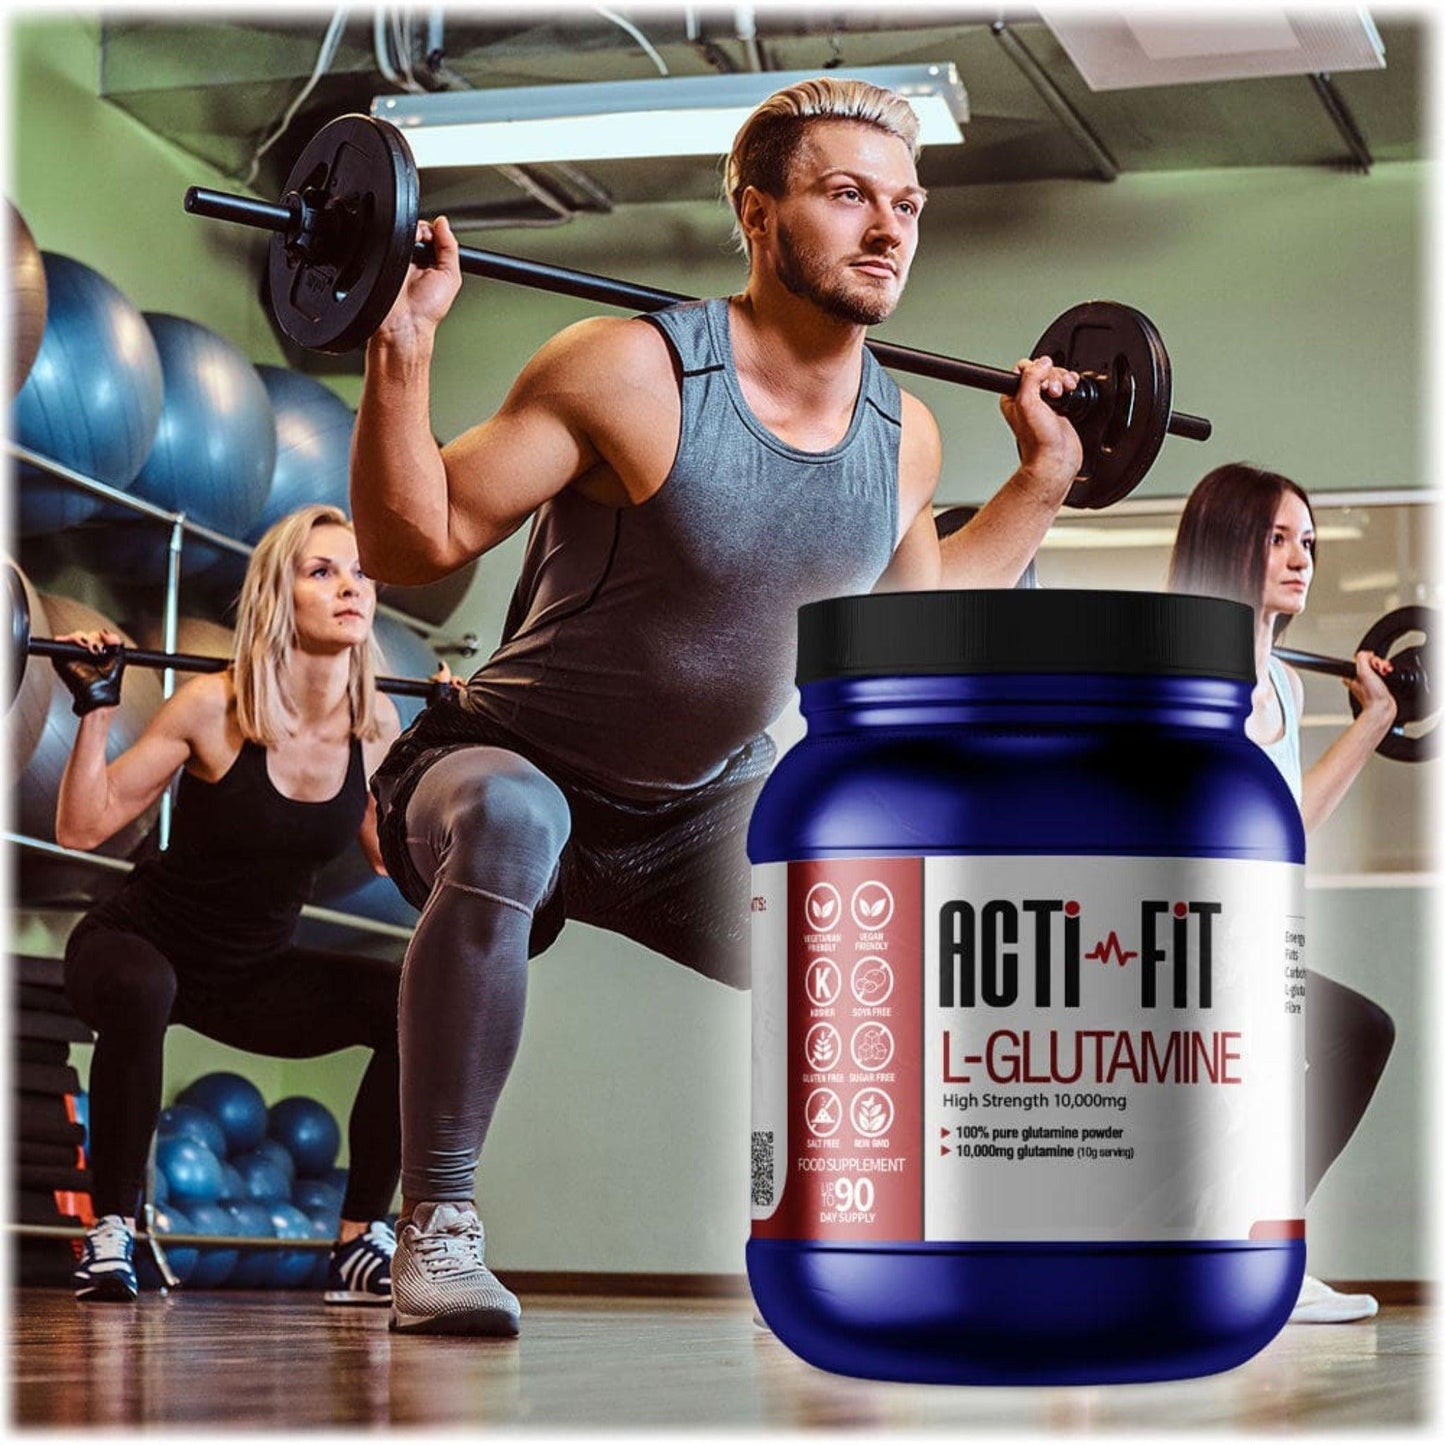 A gym class with people holding weights on their shoulders with a tub of Acti-Fit L-Glutamine 10,000mg in the foreground